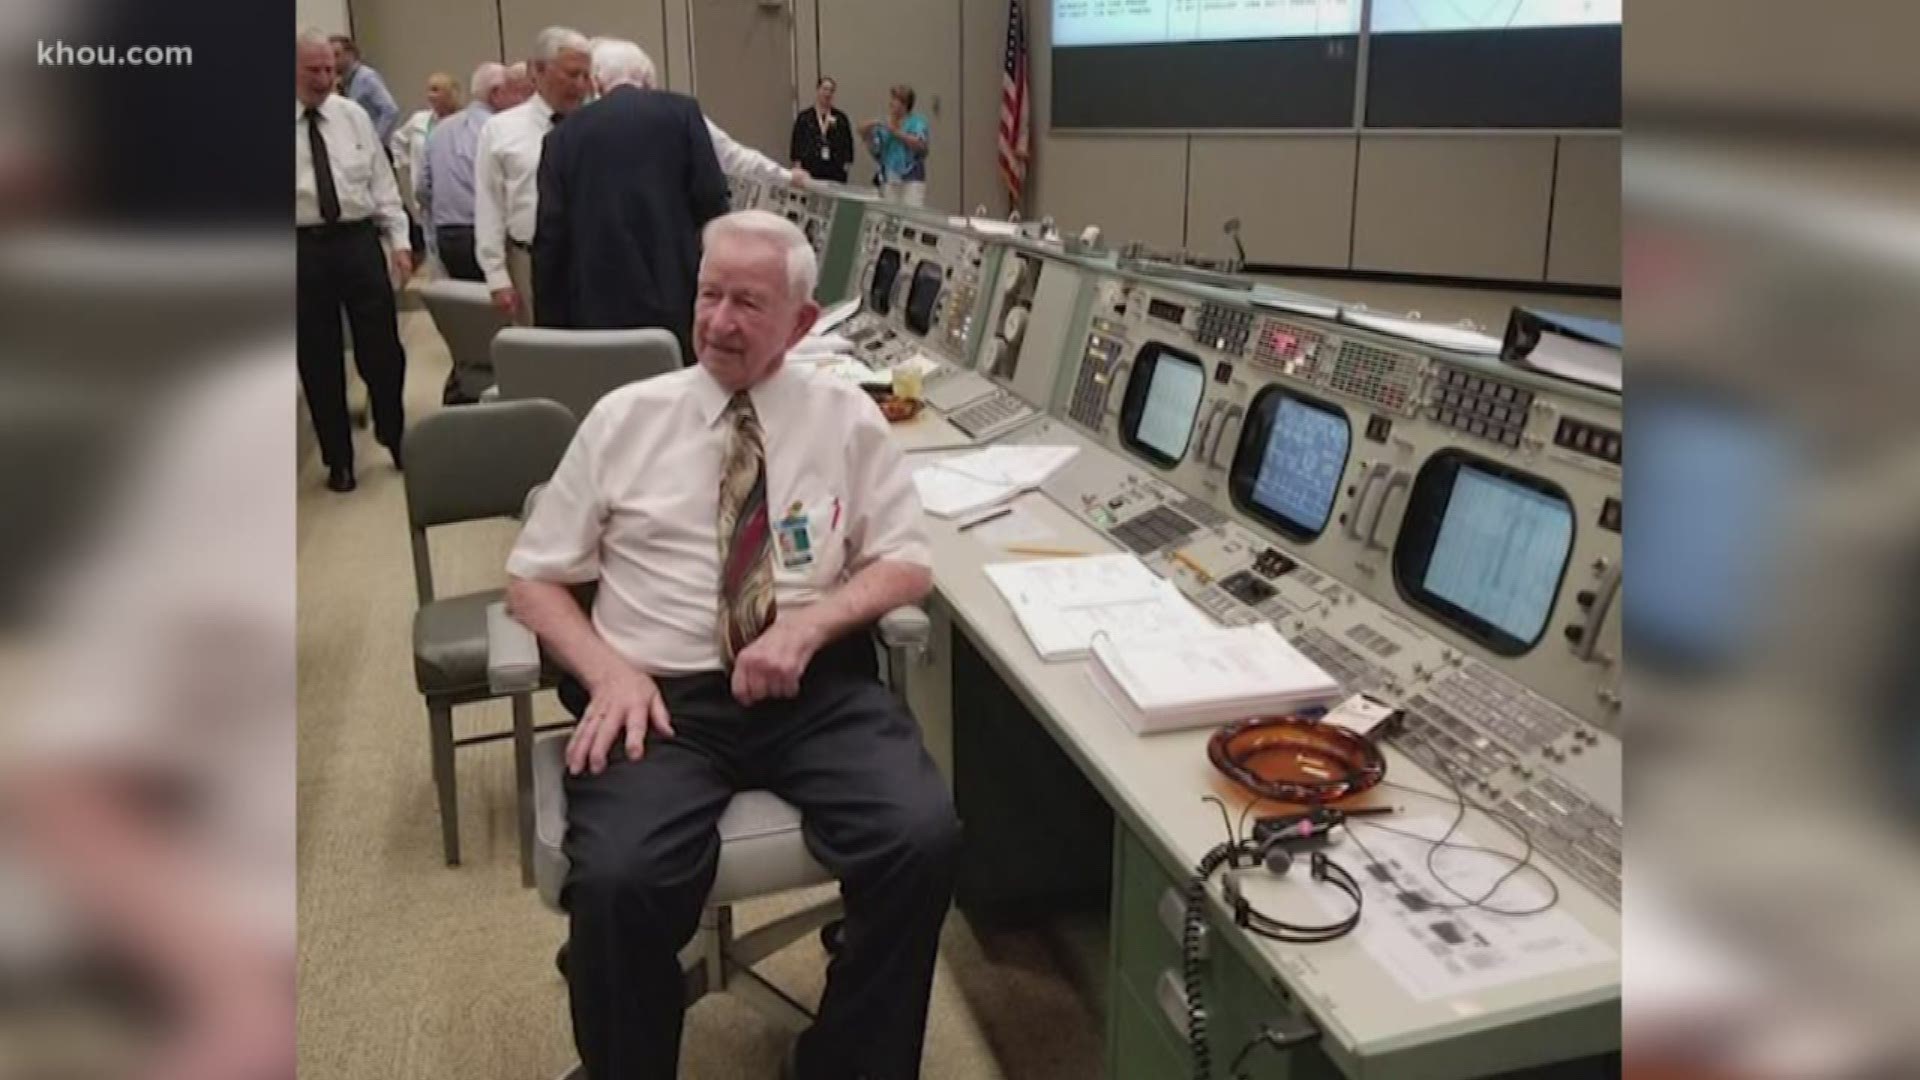 Pearland Mayor Tom Reid watched the splashdown of Apollo 11 from Mission Control 50 years ago.